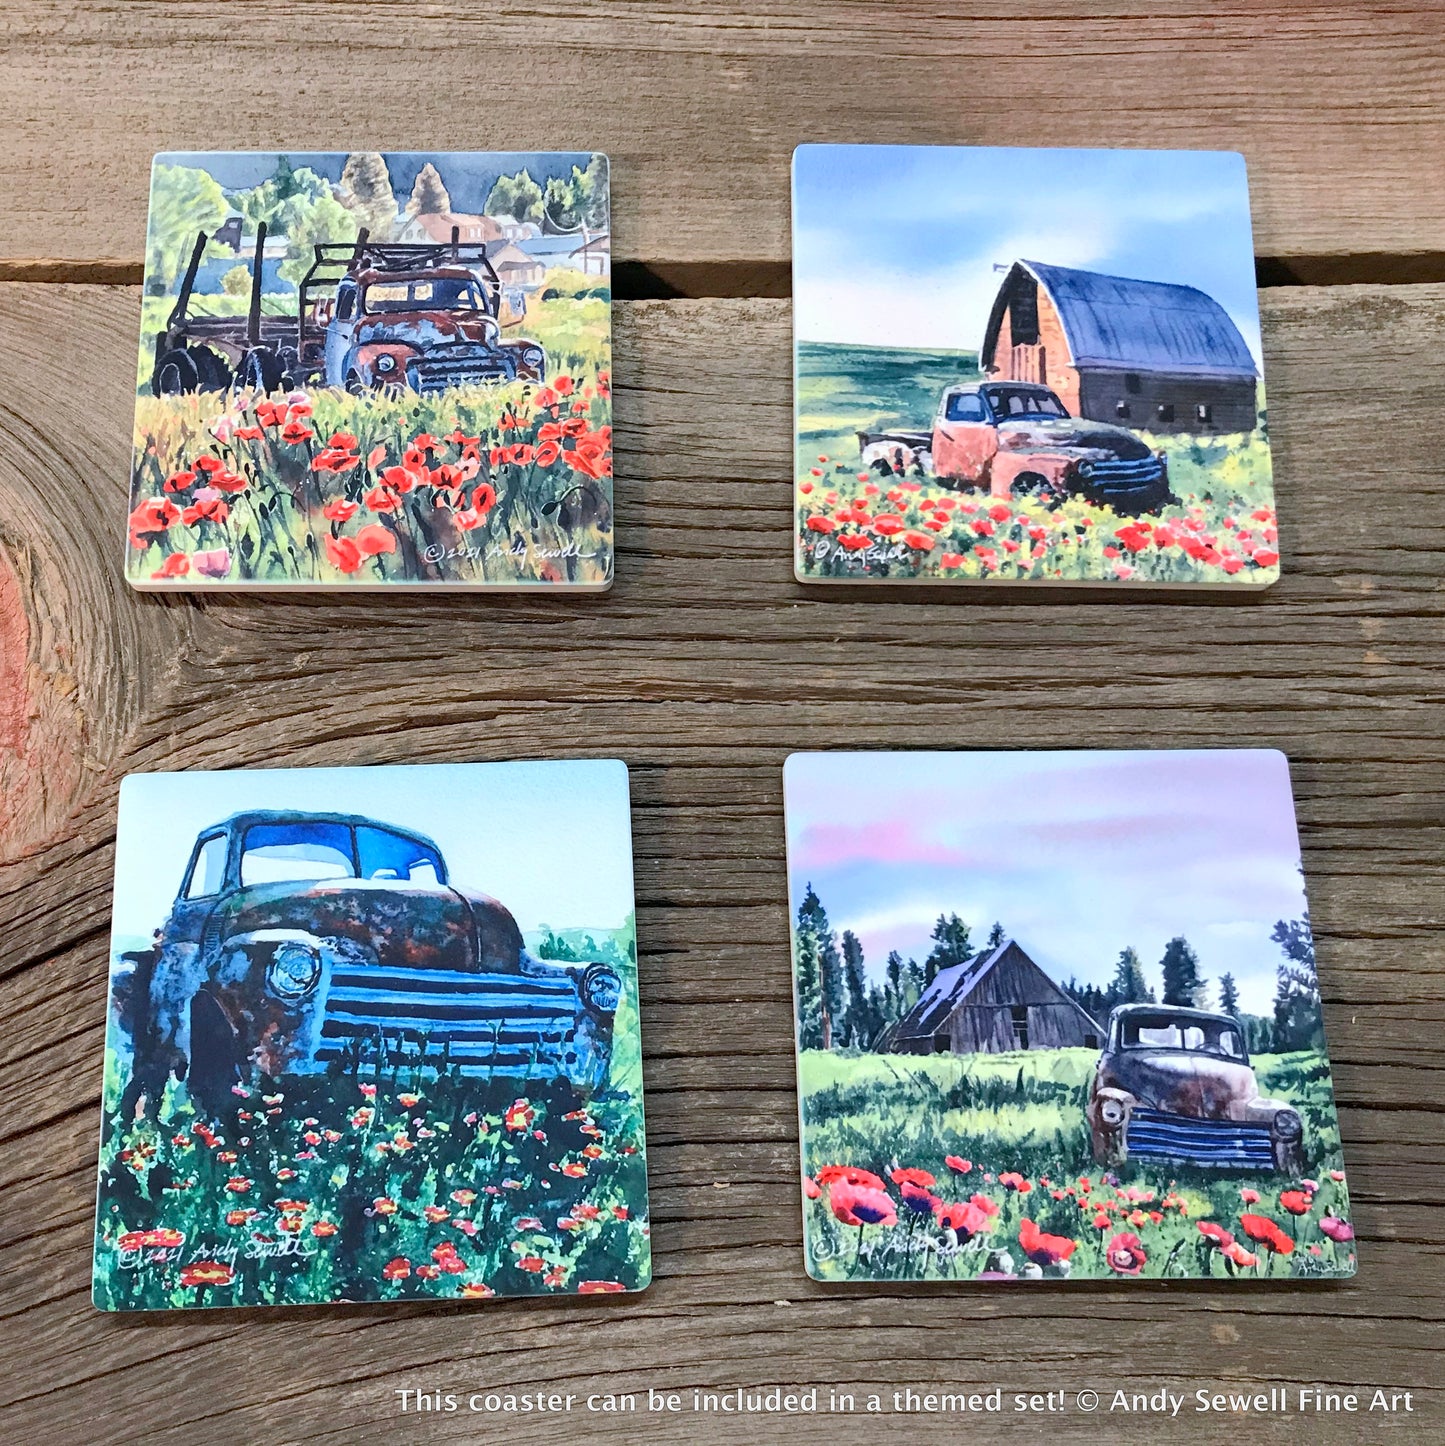 ASC219 “ Chevy in the Daisies“ ceramic coaster